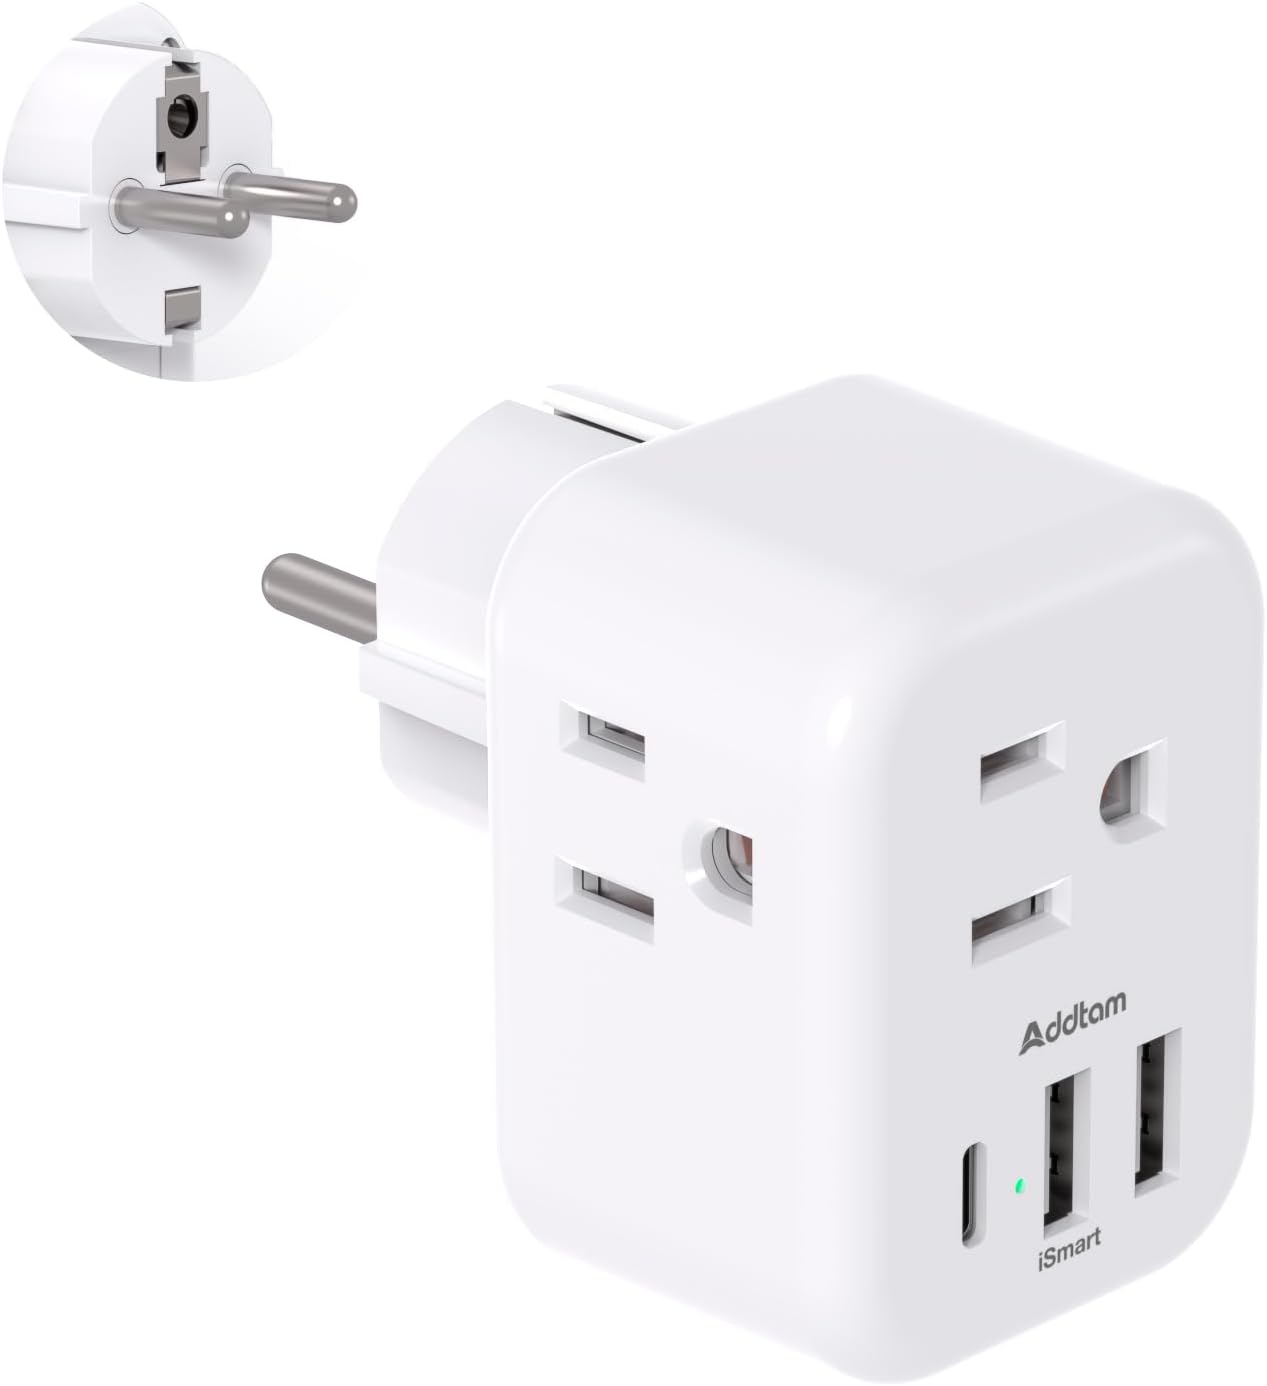 As a traveler, having a reliable plug adapter is essential for ensuring that my devices stay powered up wherever I am traveling. The Addtam US to UK Ireland Plug Adapter has proven to be an indispensable travel companion, offering a perfect blend of functionality, versatility, and compact design.The purpose of the Addtam Type G Power Adapter is its compatibility with UK and Ireland outlets, making it an ideal solution for my travels to these regions. The adapter effortlessly converts my US plugs